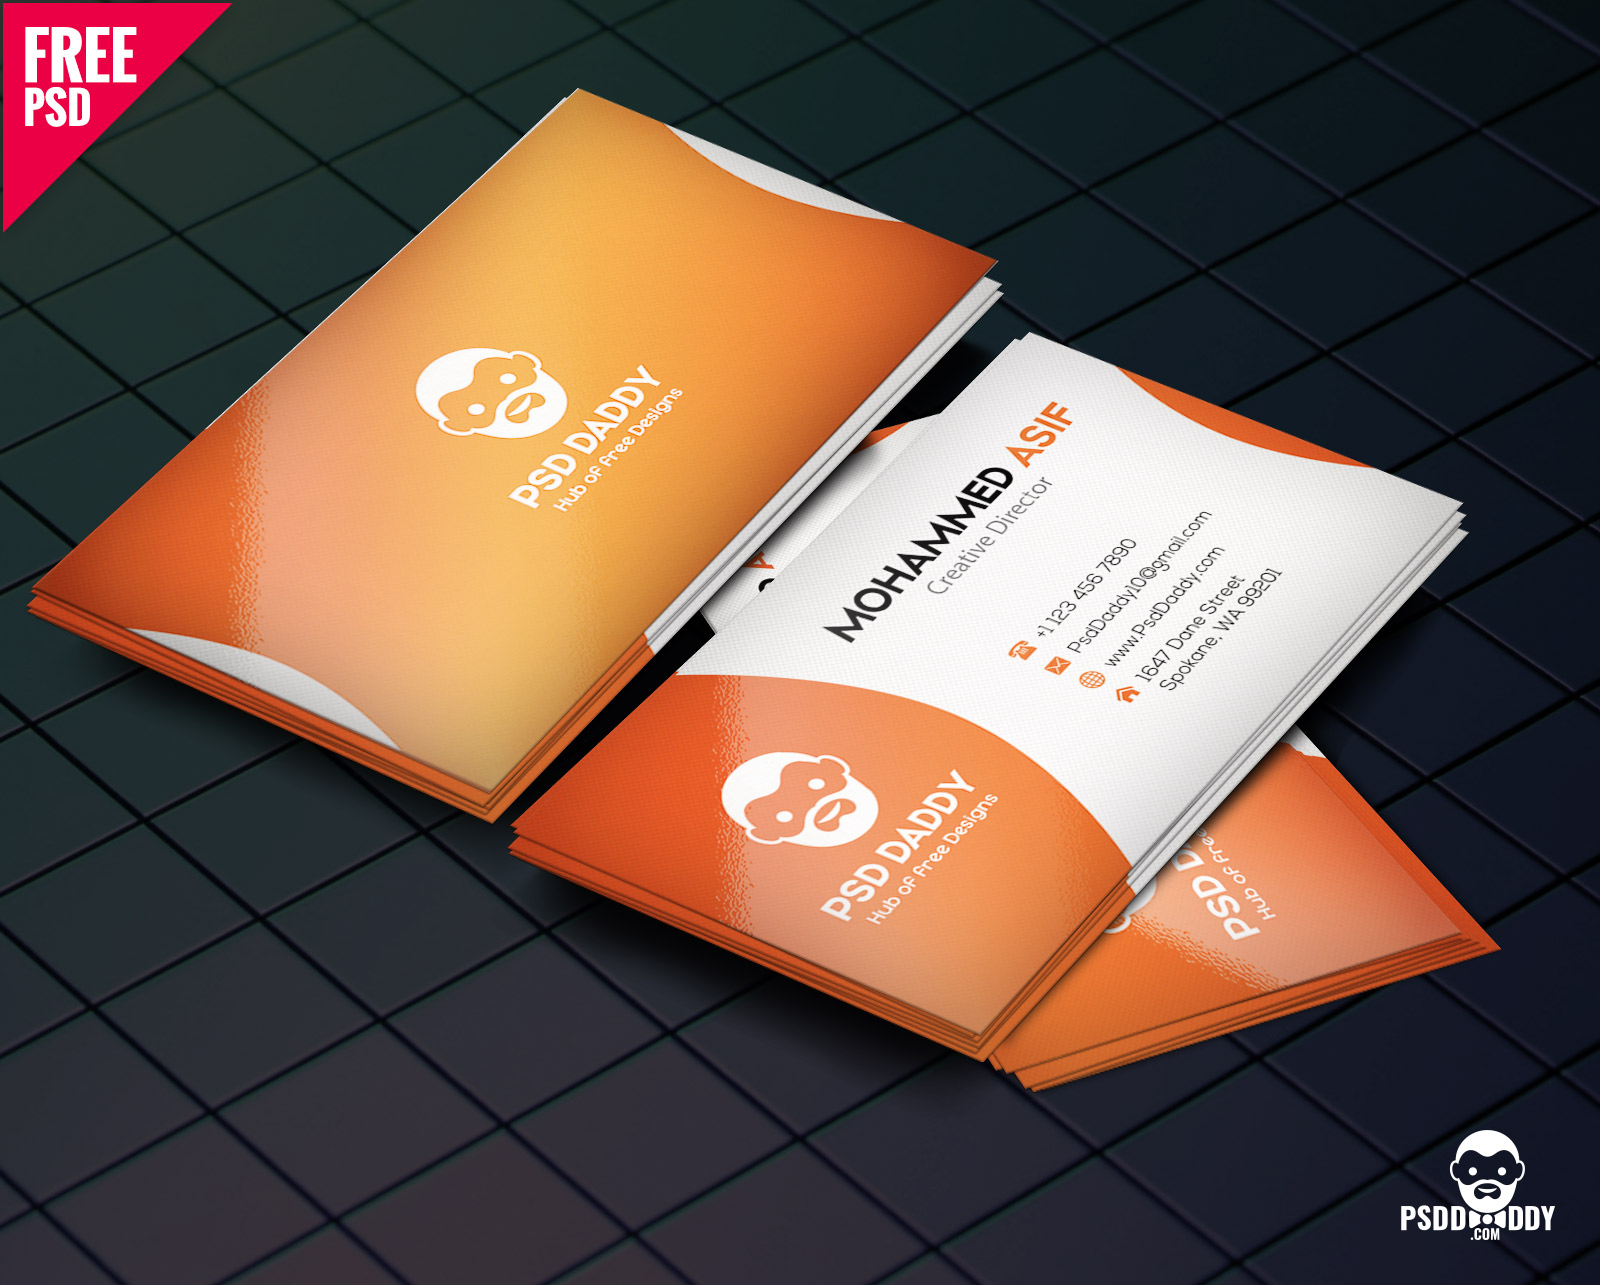 Download] Business Card Design Psd Free | Psddaddy In Visiting Card Psd Template Free Download